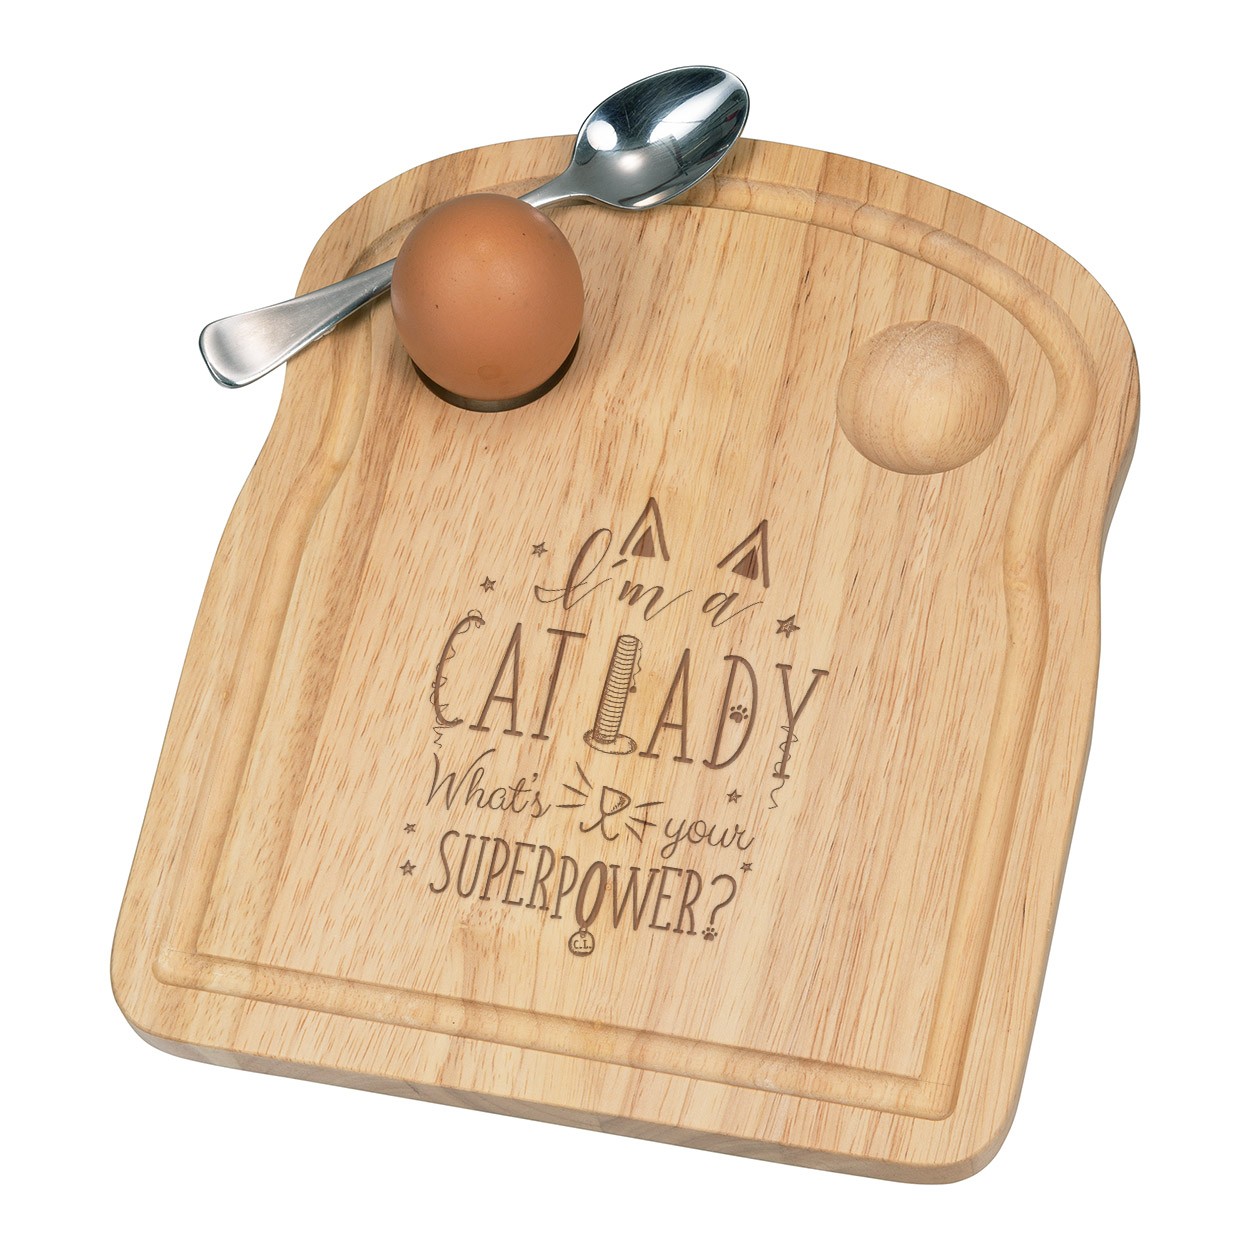 I'm A Cat Lady What's Your Superpower Breakfast Dippy Egg Cup Board Wooden